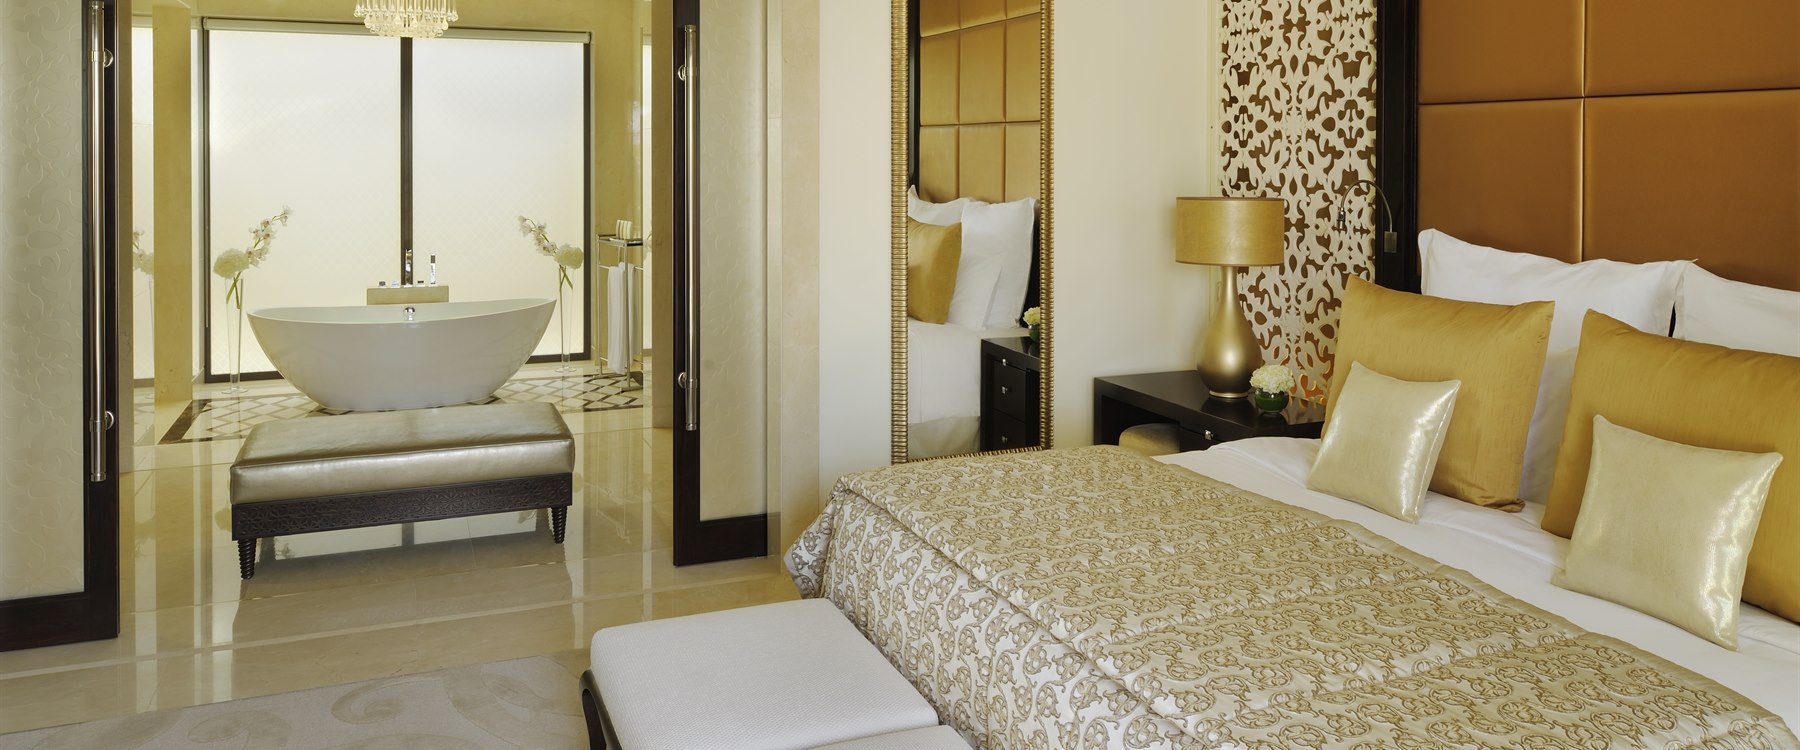 Accommodation at One&Only The Palm, Dubai